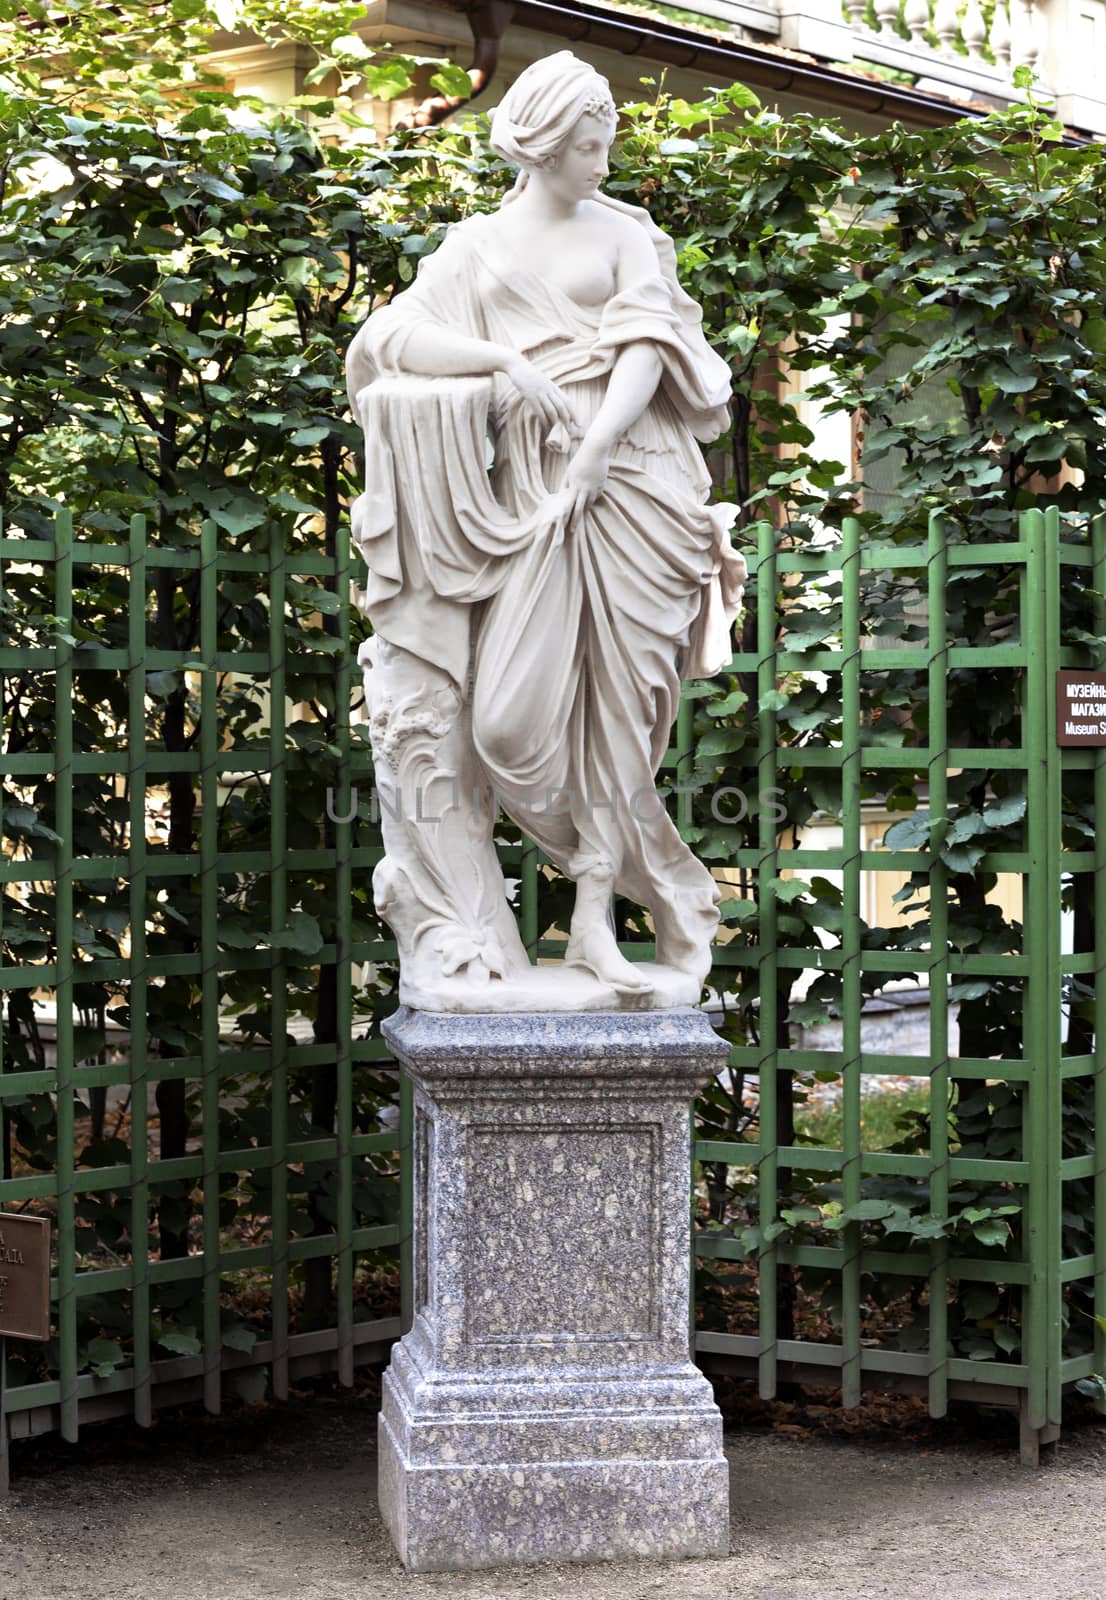 Statue of Nymph of the Summer Garden, St. Petersburg, Russia